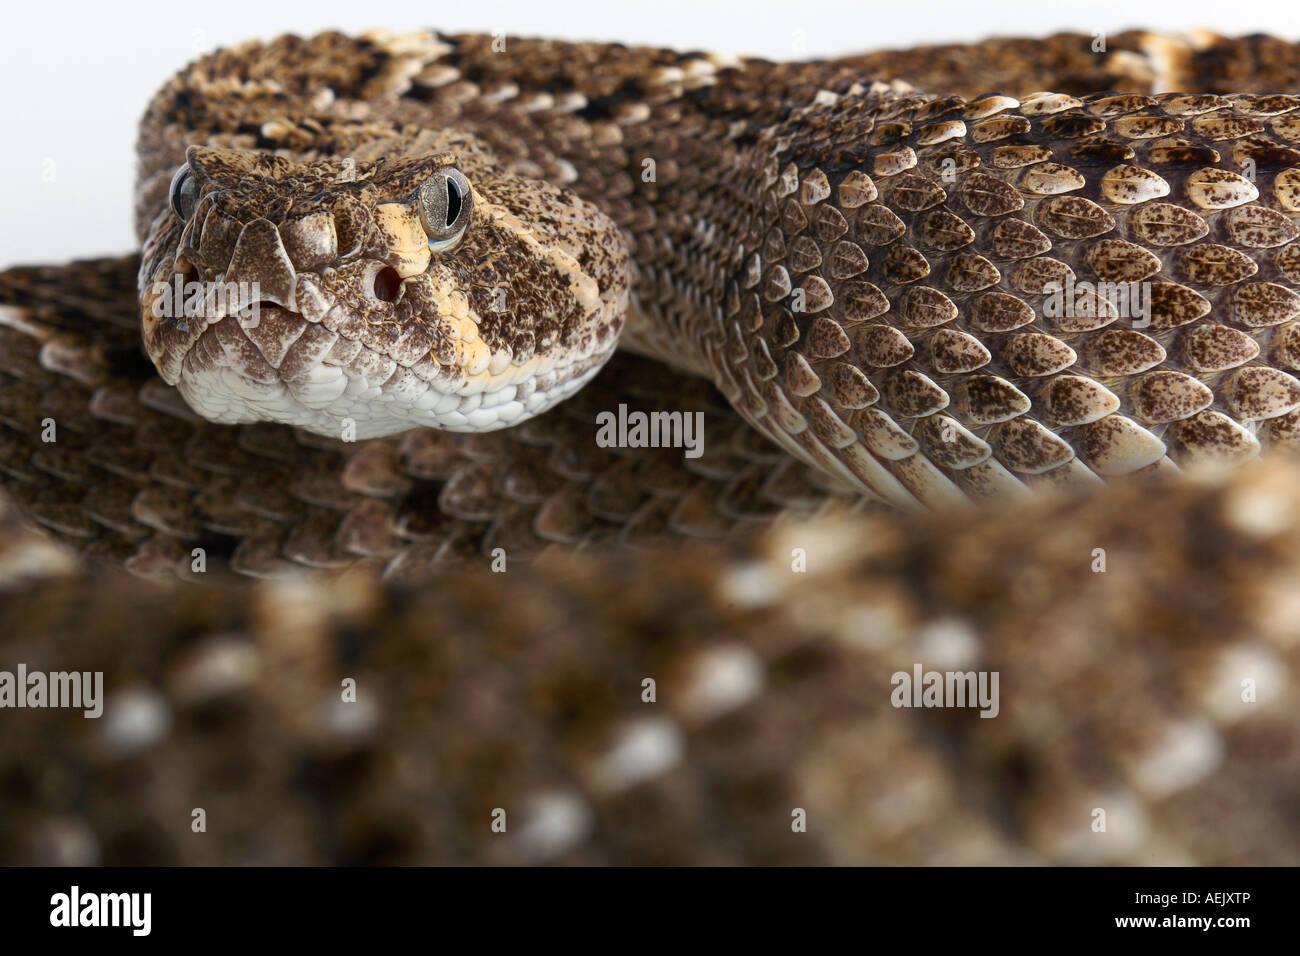 Mexican rattle snake (Crotalus) Stock Photo